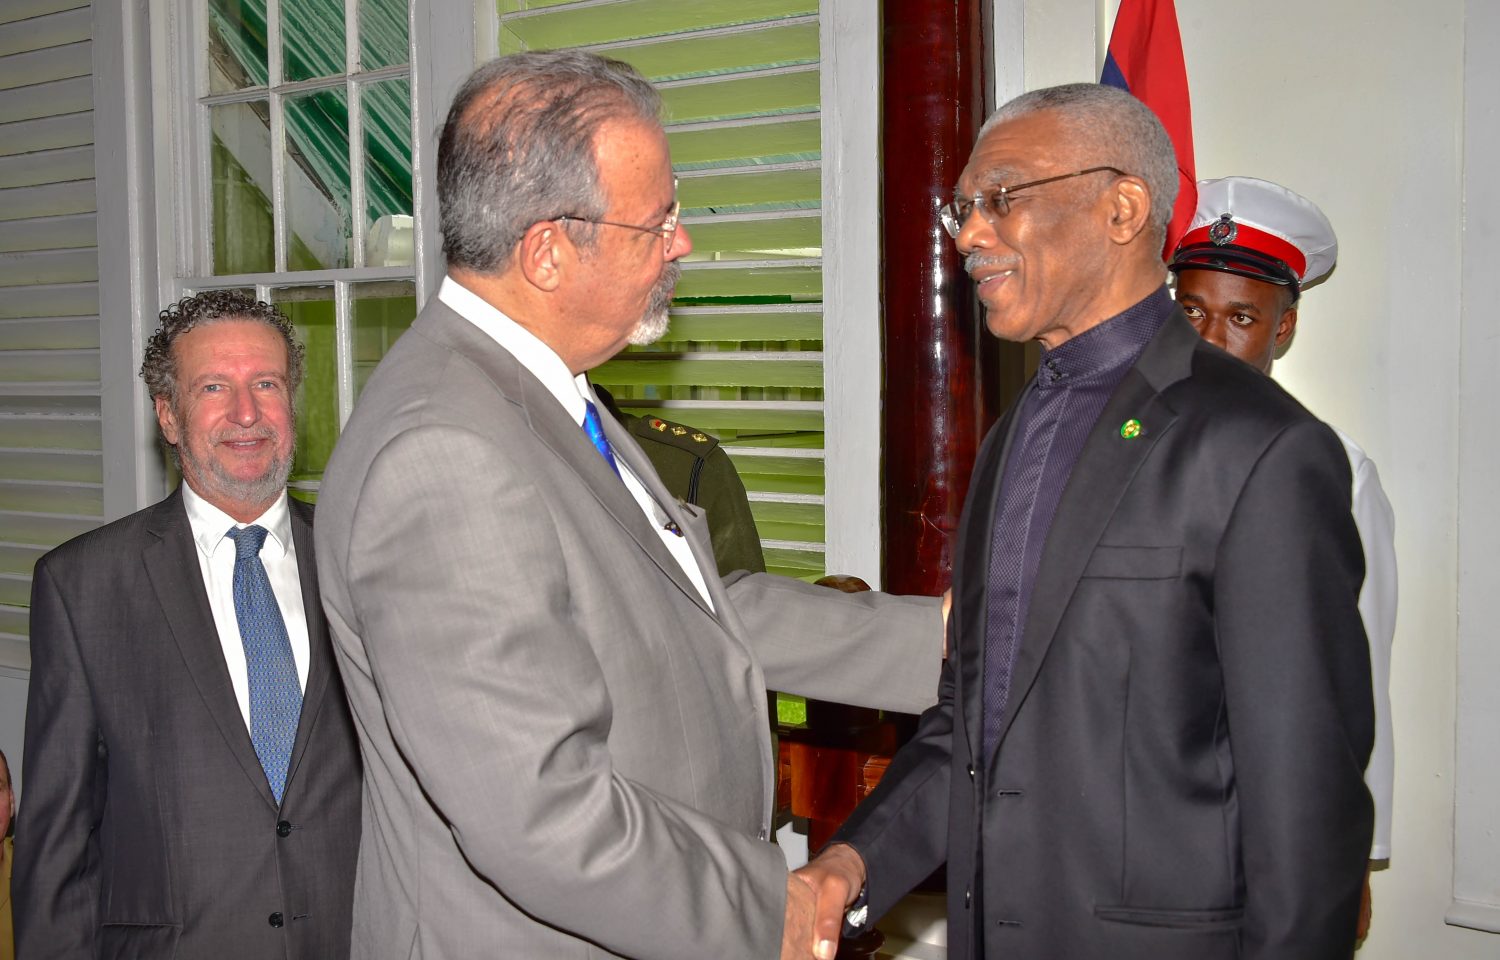 President David Granger (right) greeting Brazil’s Minister of Defence, Raul Jungmann. He later introduced him to members of Cabinet and the Defence Board. (Ministry of the Presidency photo)